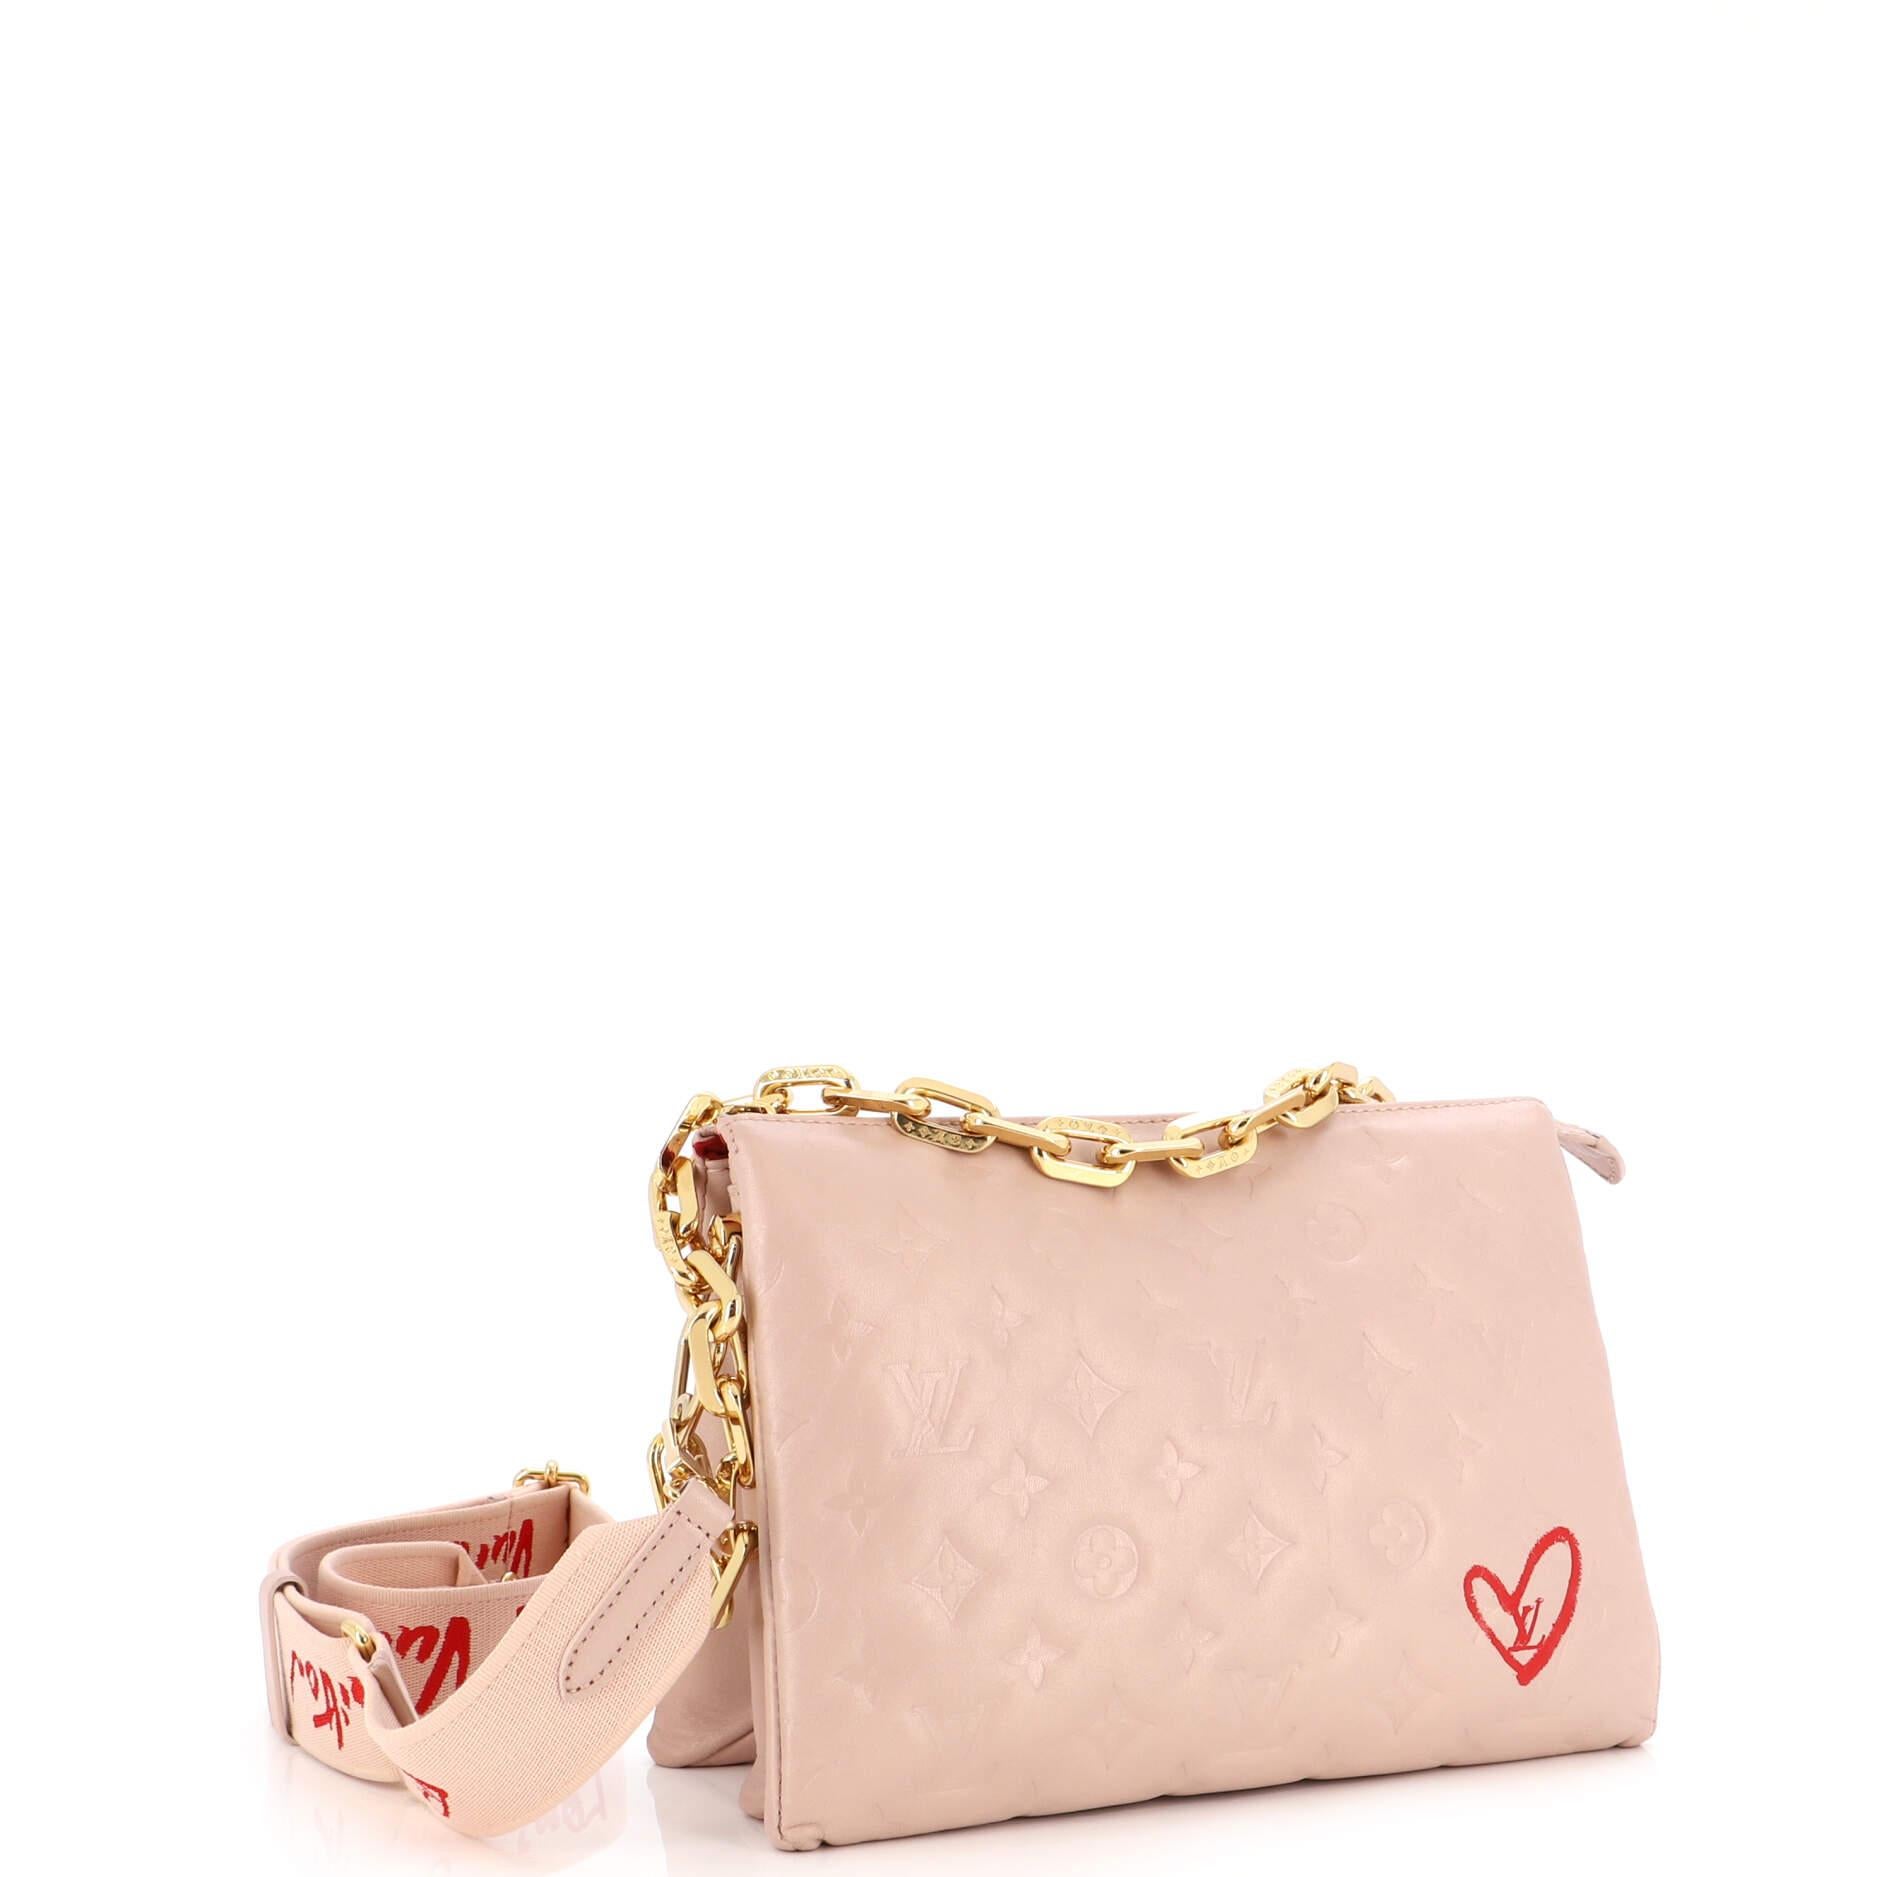 BRAND NEW LOUIS VUITTON COUSSIN PM FALL IN LOVE PINK BAG SOLD OUT